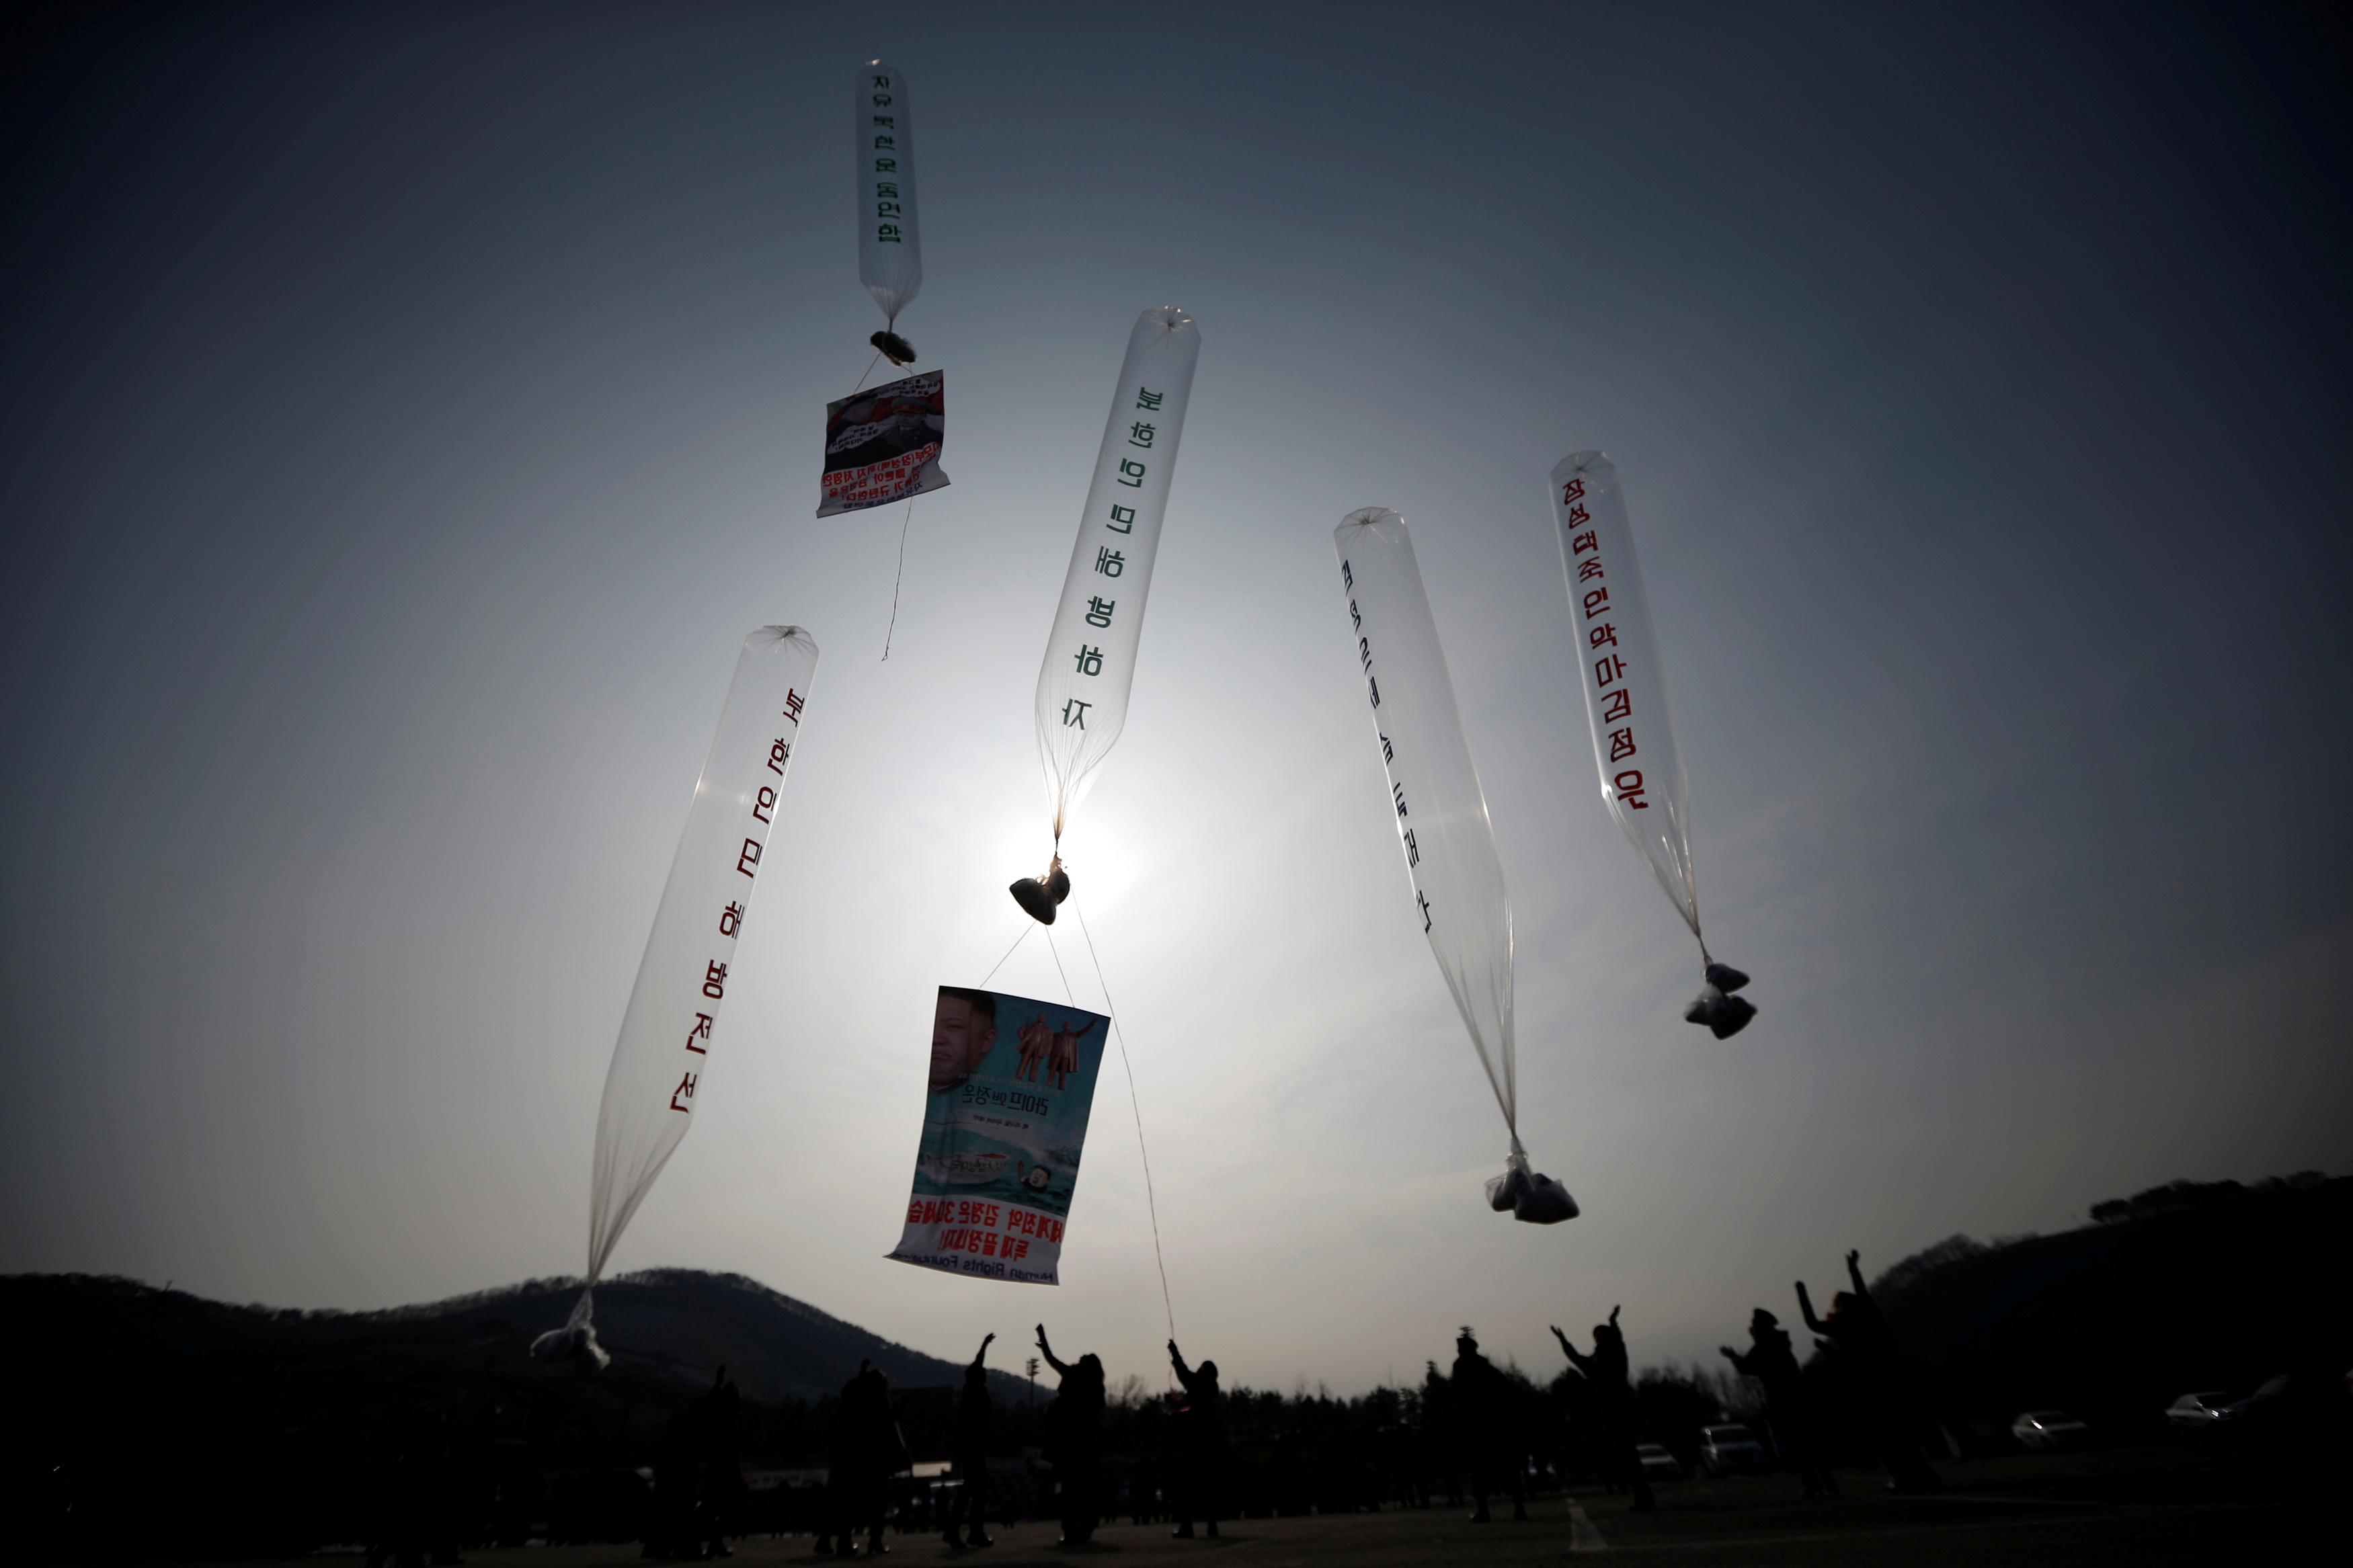 Former North Korean defectors living in South Korea release balloons containing one dollar banknotes, radios, CDs and leaflets denouncing the North Korean regime towards the demilitarized zone, in Paju, north of Seoul